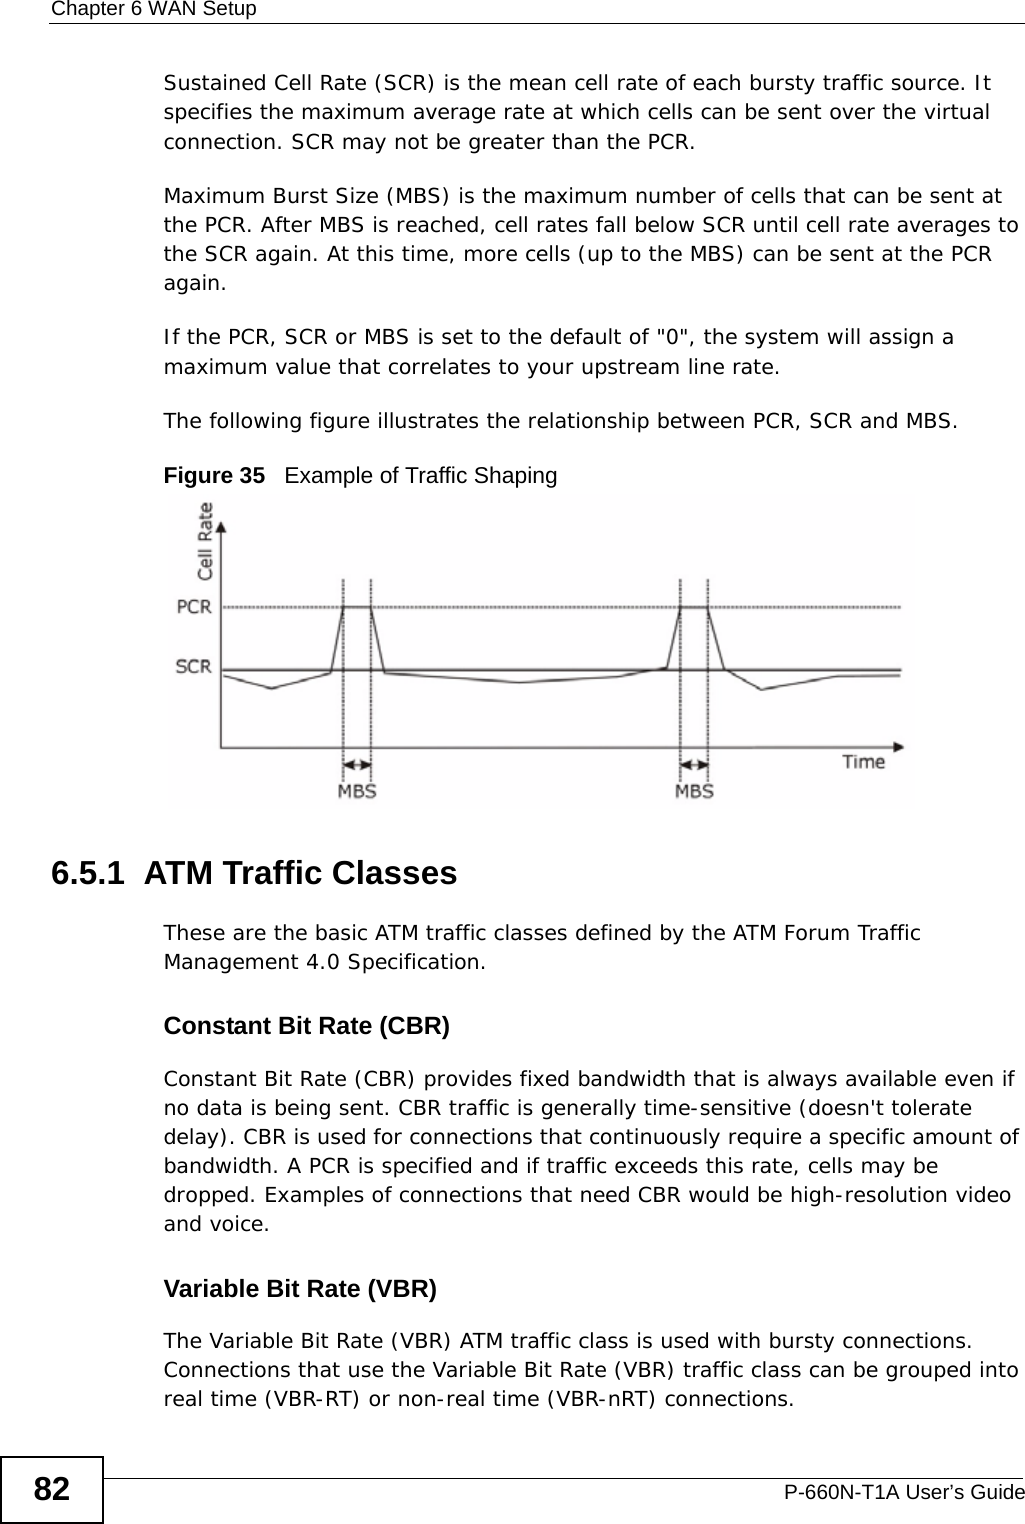 Chapter 6 WAN SetupP-660N-T1A User’s Guide82Sustained Cell Rate (SCR) is the mean cell rate of each bursty traffic source. It specifies the maximum average rate at which cells can be sent over the virtual connection. SCR may not be greater than the PCR.Maximum Burst Size (MBS) is the maximum number of cells that can be sent at the PCR. After MBS is reached, cell rates fall below SCR until cell rate averages to the SCR again. At this time, more cells (up to the MBS) can be sent at the PCR again.If the PCR, SCR or MBS is set to the default of &quot;0&quot;, the system will assign a maximum value that correlates to your upstream line rate. The following figure illustrates the relationship between PCR, SCR and MBS. Figure 35   Example of Traffic Shaping6.5.1  ATM Traffic ClassesThese are the basic ATM traffic classes defined by the ATM Forum Traffic Management 4.0 Specification. Constant Bit Rate (CBR)Constant Bit Rate (CBR) provides fixed bandwidth that is always available even if no data is being sent. CBR traffic is generally time-sensitive (doesn&apos;t tolerate delay). CBR is used for connections that continuously require a specific amount of bandwidth. A PCR is specified and if traffic exceeds this rate, cells may be dropped. Examples of connections that need CBR would be high-resolution video and voice.Variable Bit Rate (VBR) The Variable Bit Rate (VBR) ATM traffic class is used with bursty connections. Connections that use the Variable Bit Rate (VBR) traffic class can be grouped into real time (VBR-RT) or non-real time (VBR-nRT) connections. 